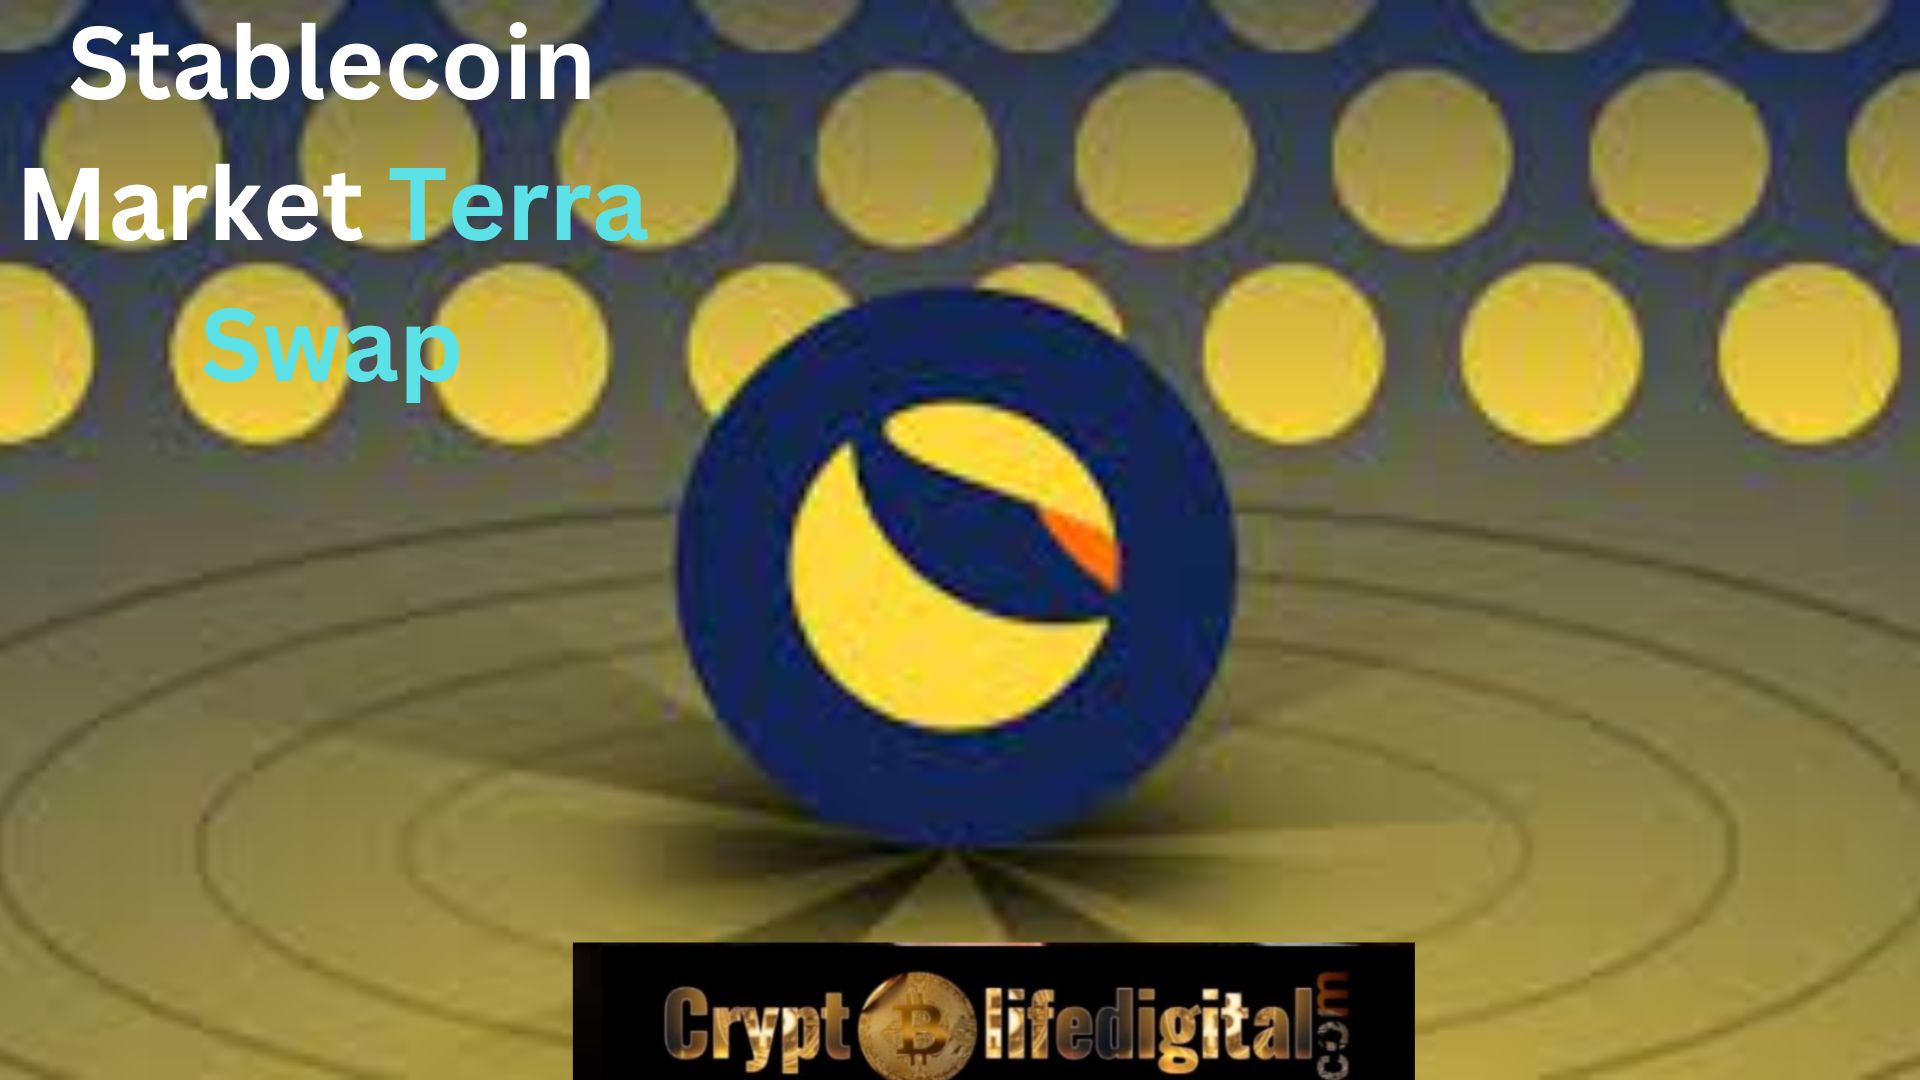 LUNC Community To Remove And Secure Stablecoin Market Terra Swap